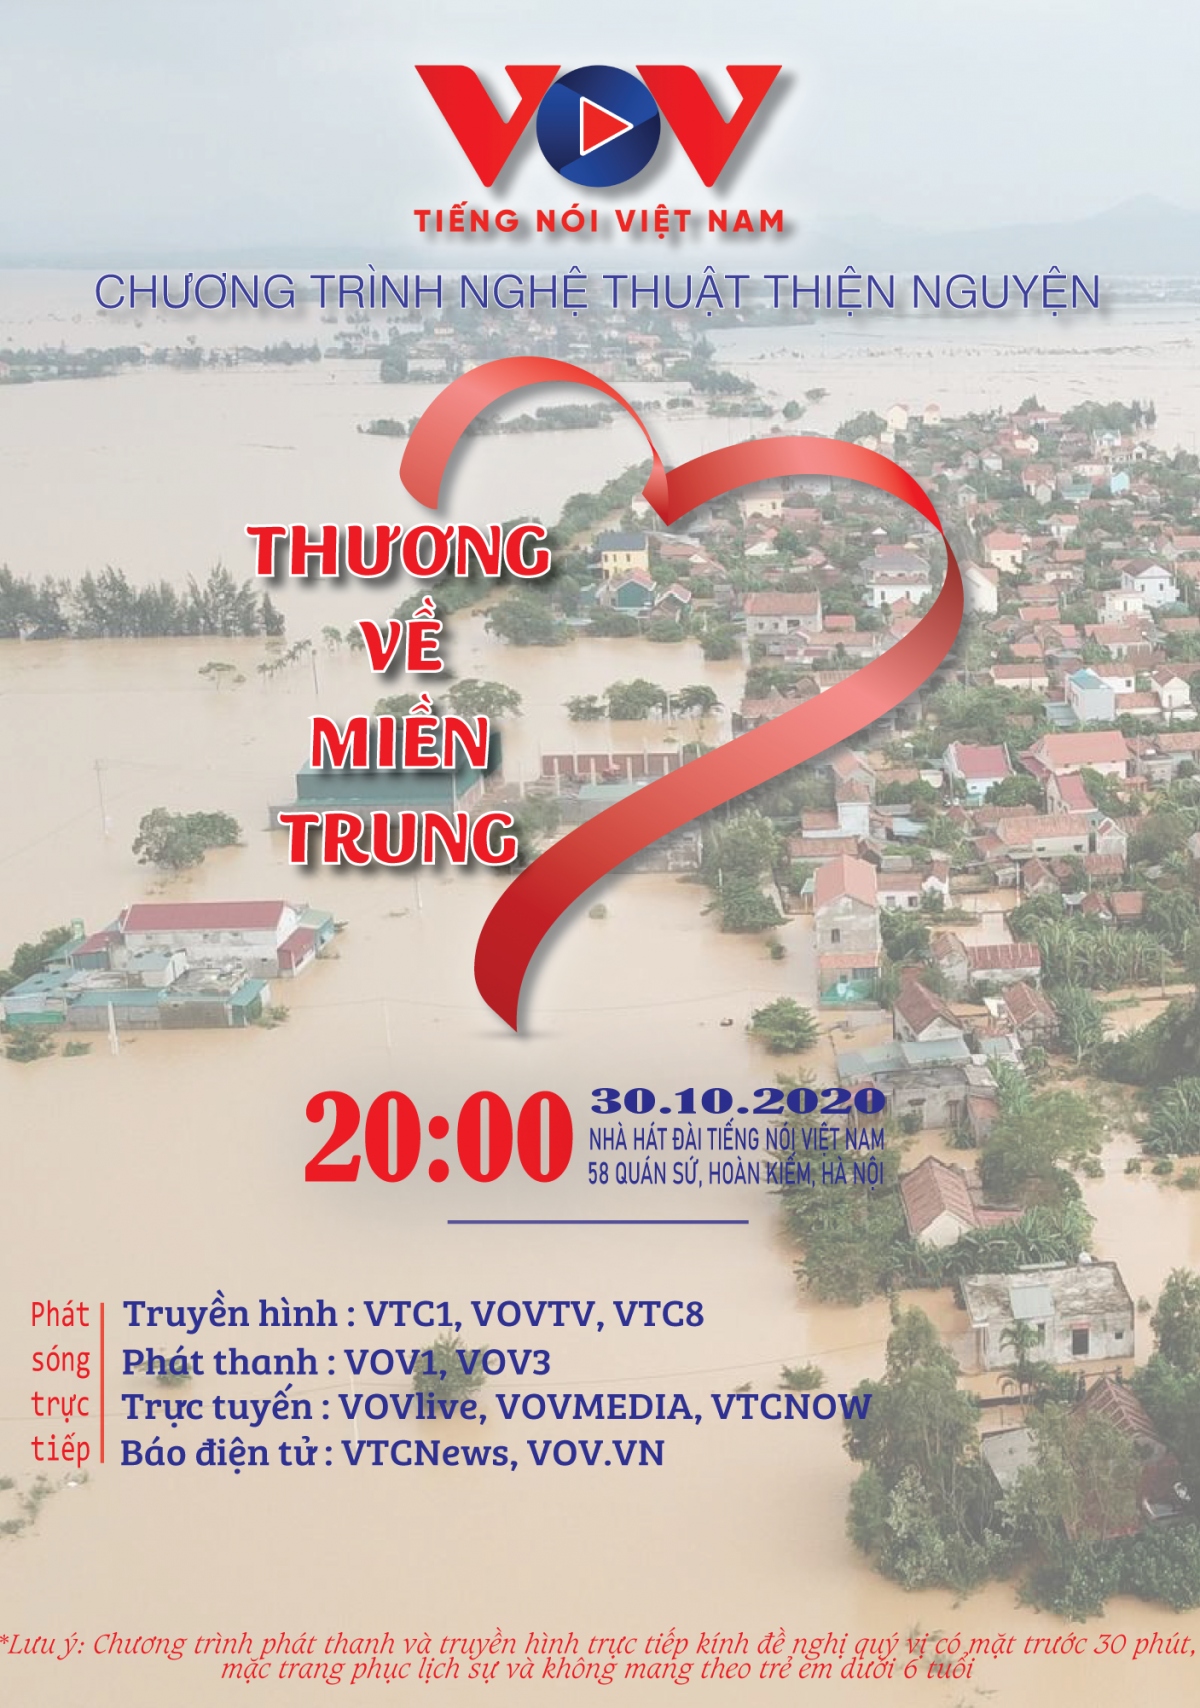 vov to chuc chuong trinh nghe thuat thien nguyen thuong ve mien trung hinh anh 1